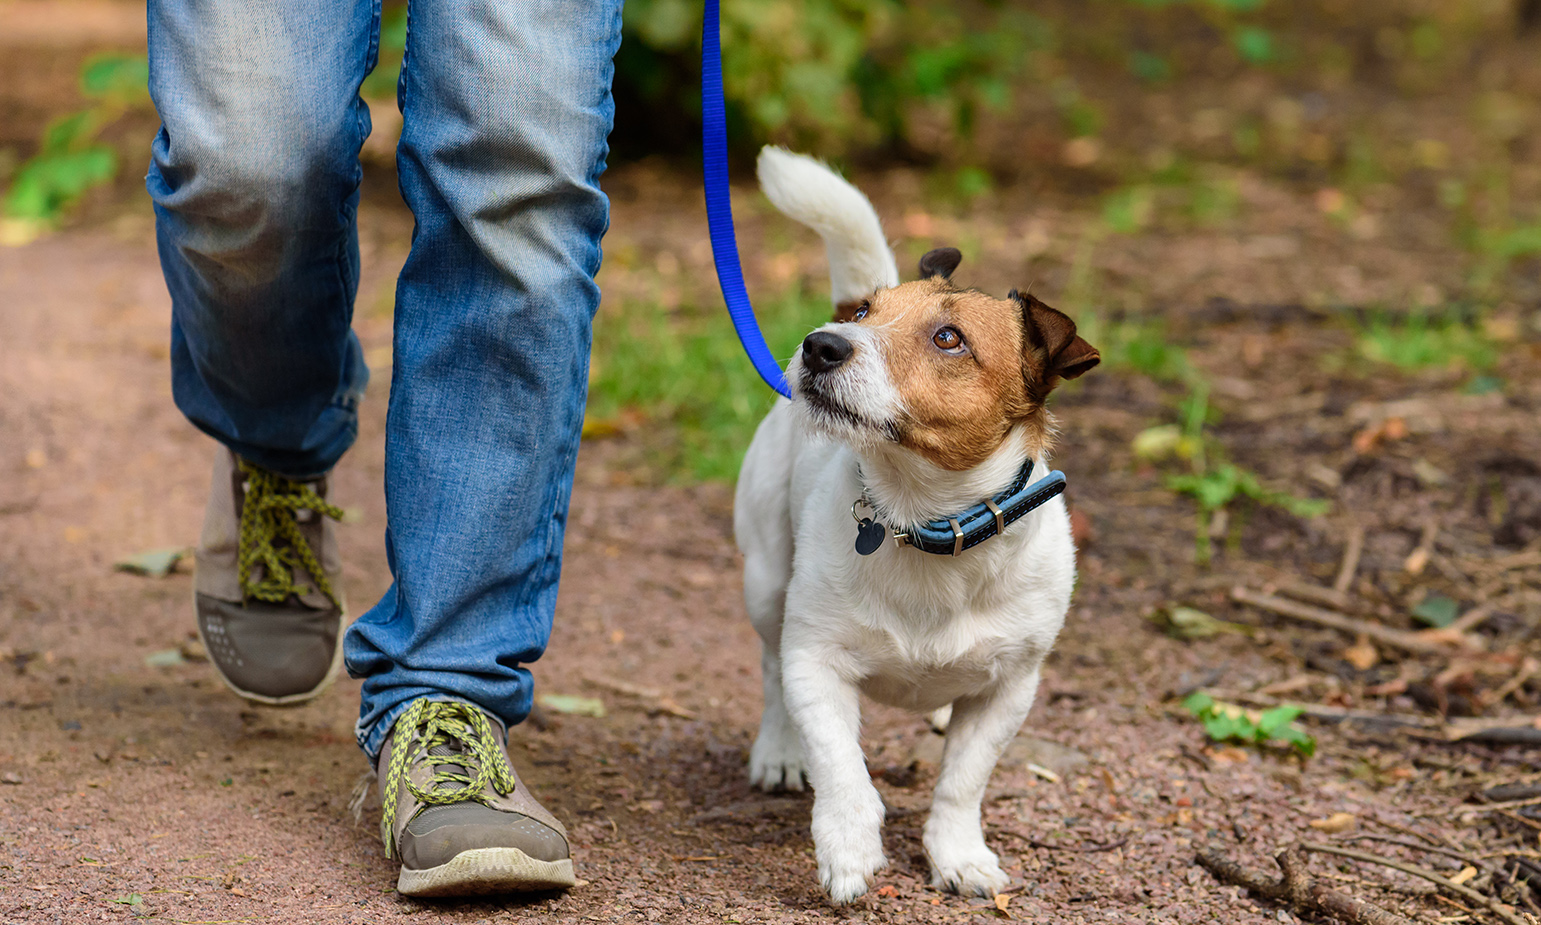 Jack Russell Terrier being walked through forest along path